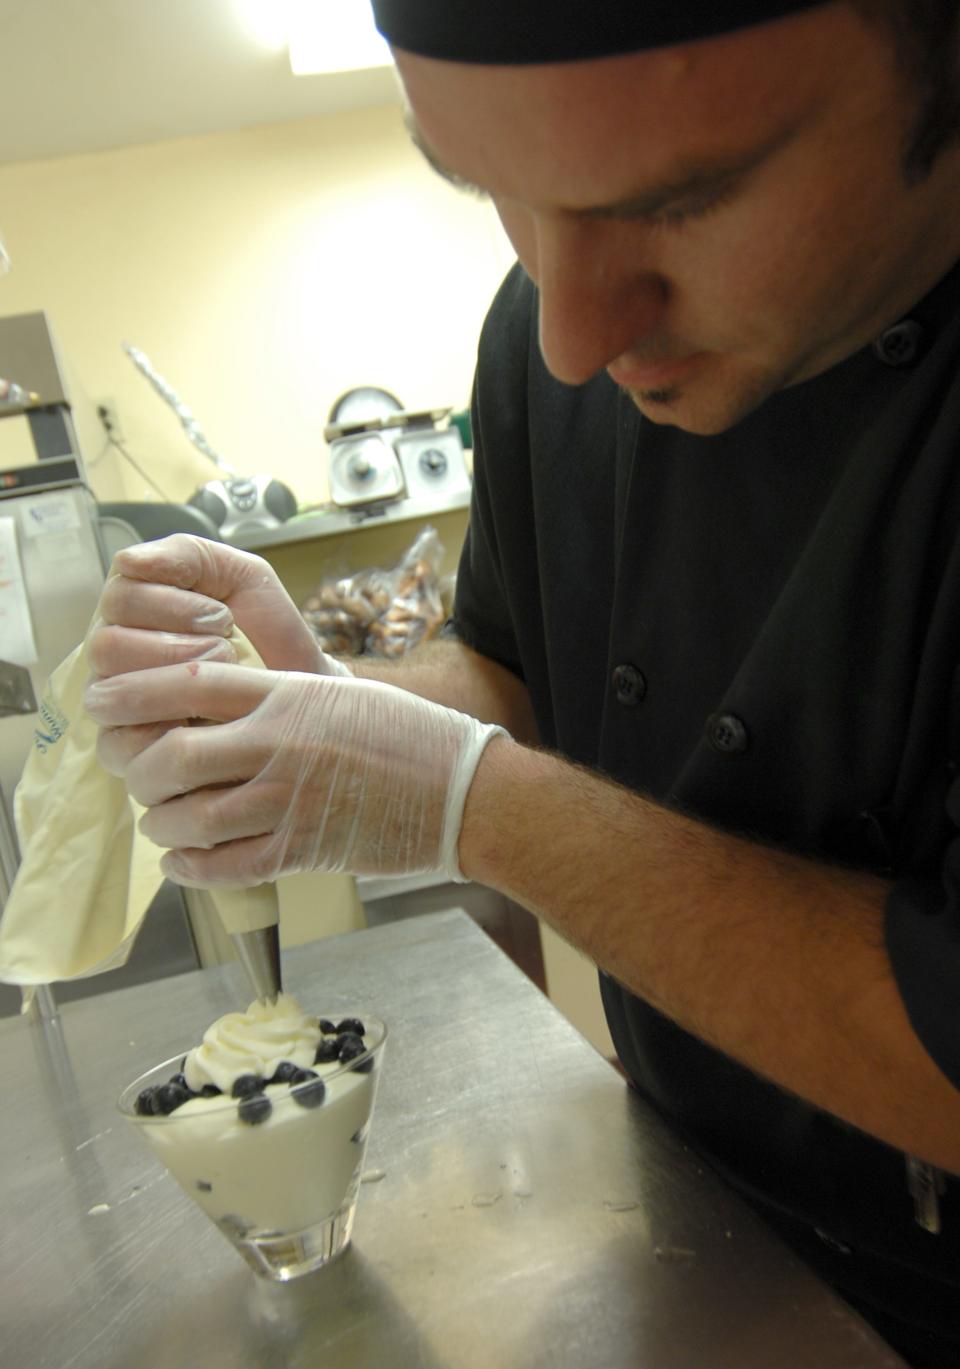 Executive Chef Travis Teska prepares a lemon mousse in July 2008 at The Wright Place on 6th in Wausau. The restaurant opened in September 2006 and operated until 2012 in the historic Ely Wright House.